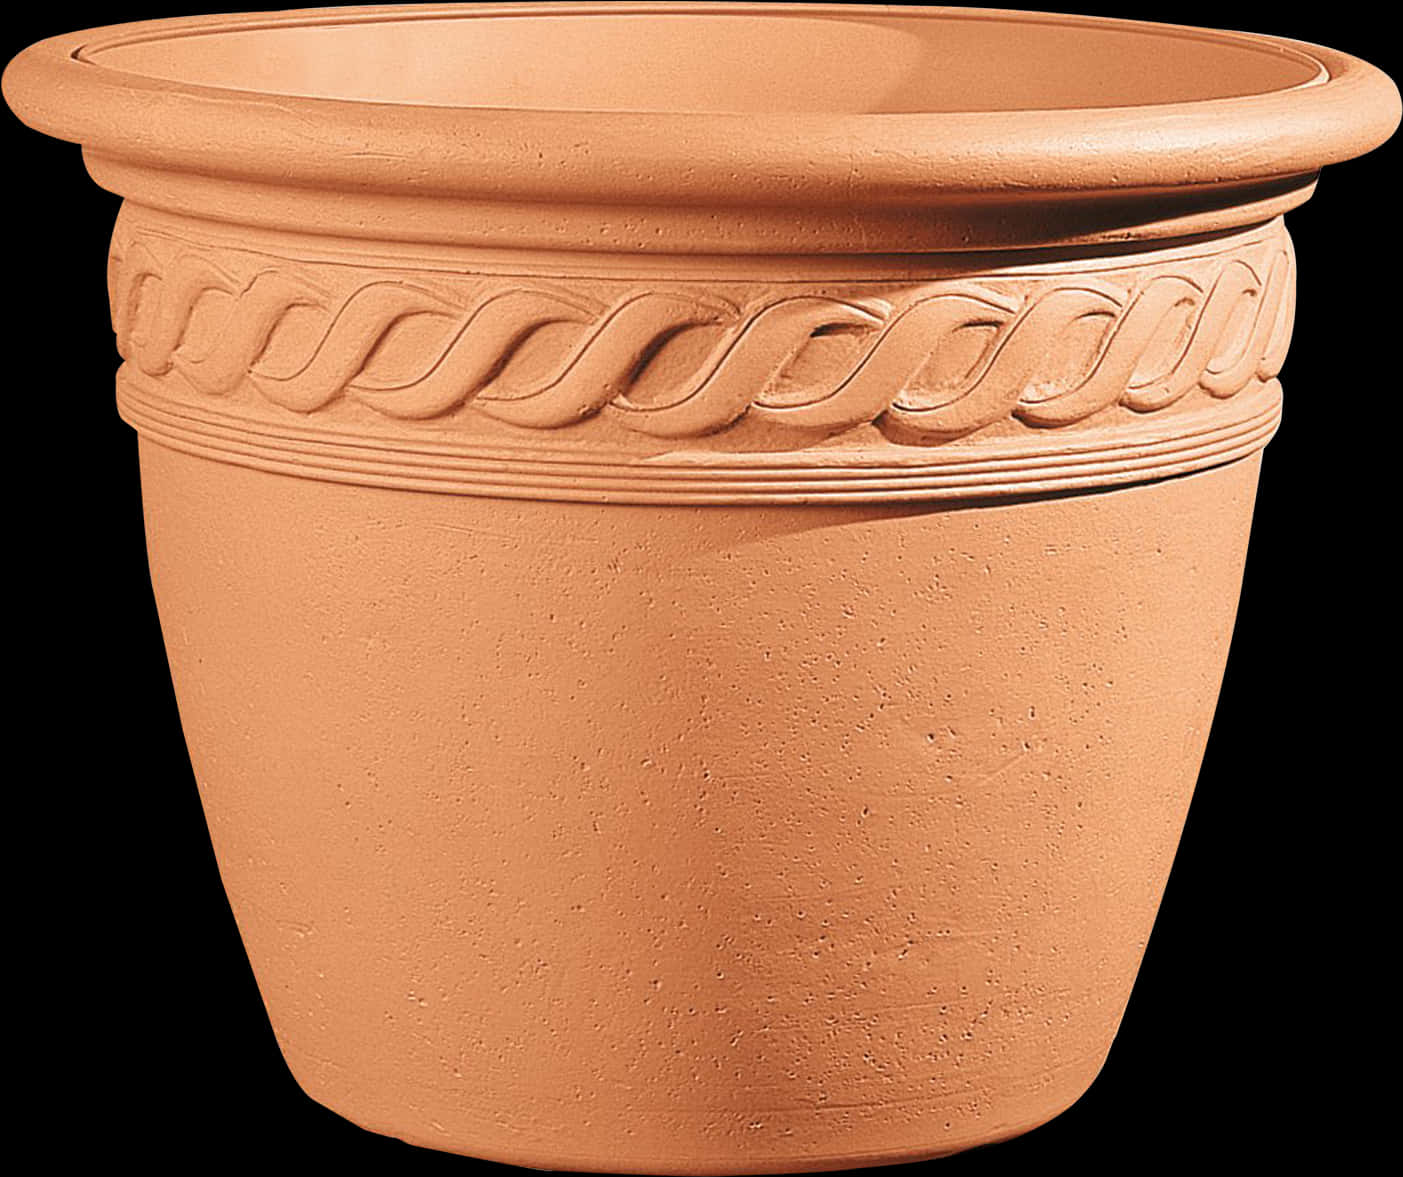 A Clay Pot With A Braided Design